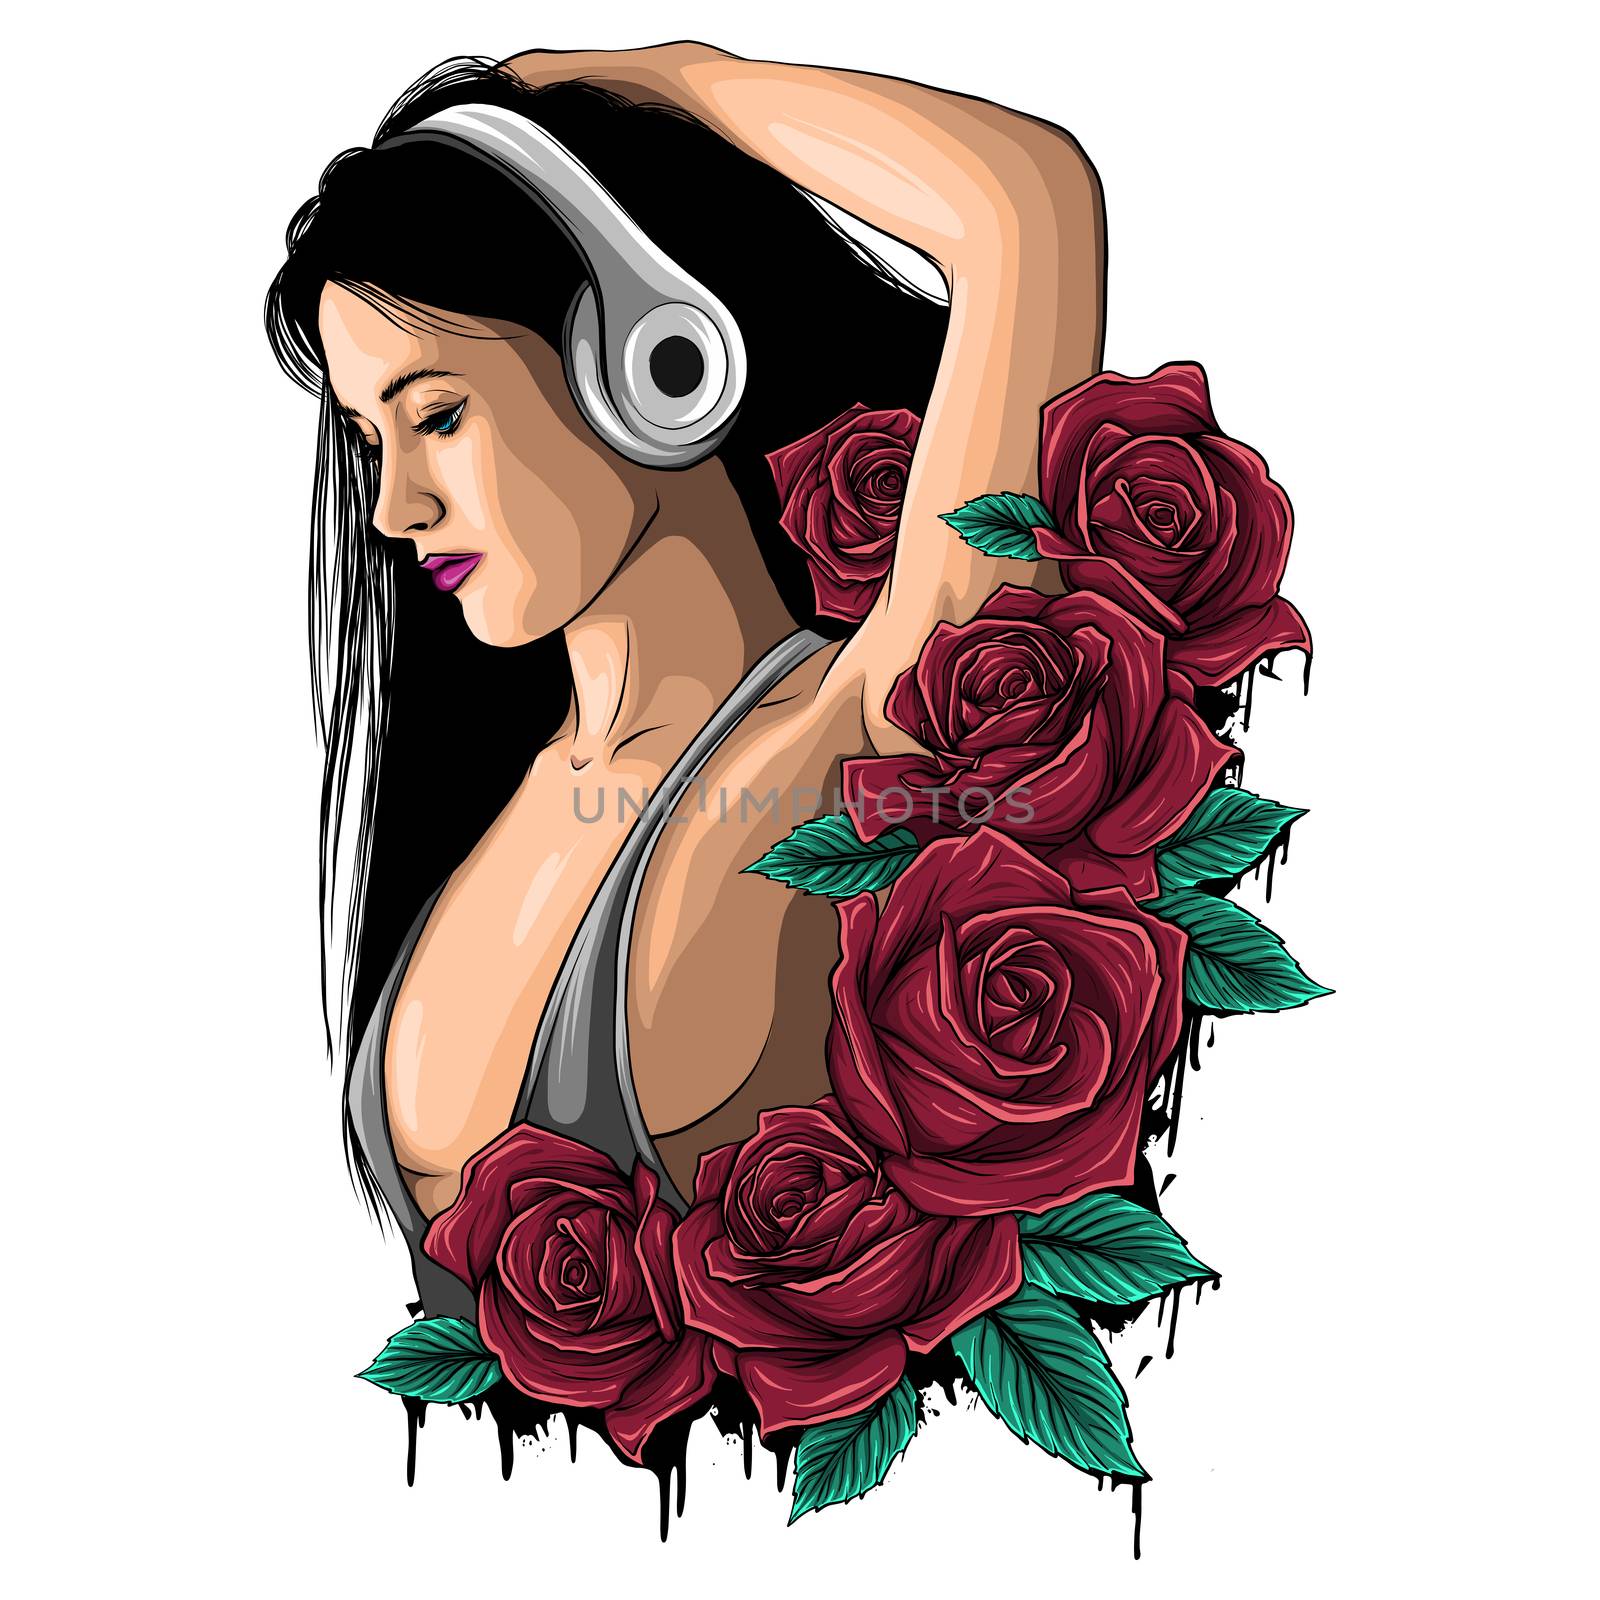 vecto illustration beautiful girl with headphones and roses by dean